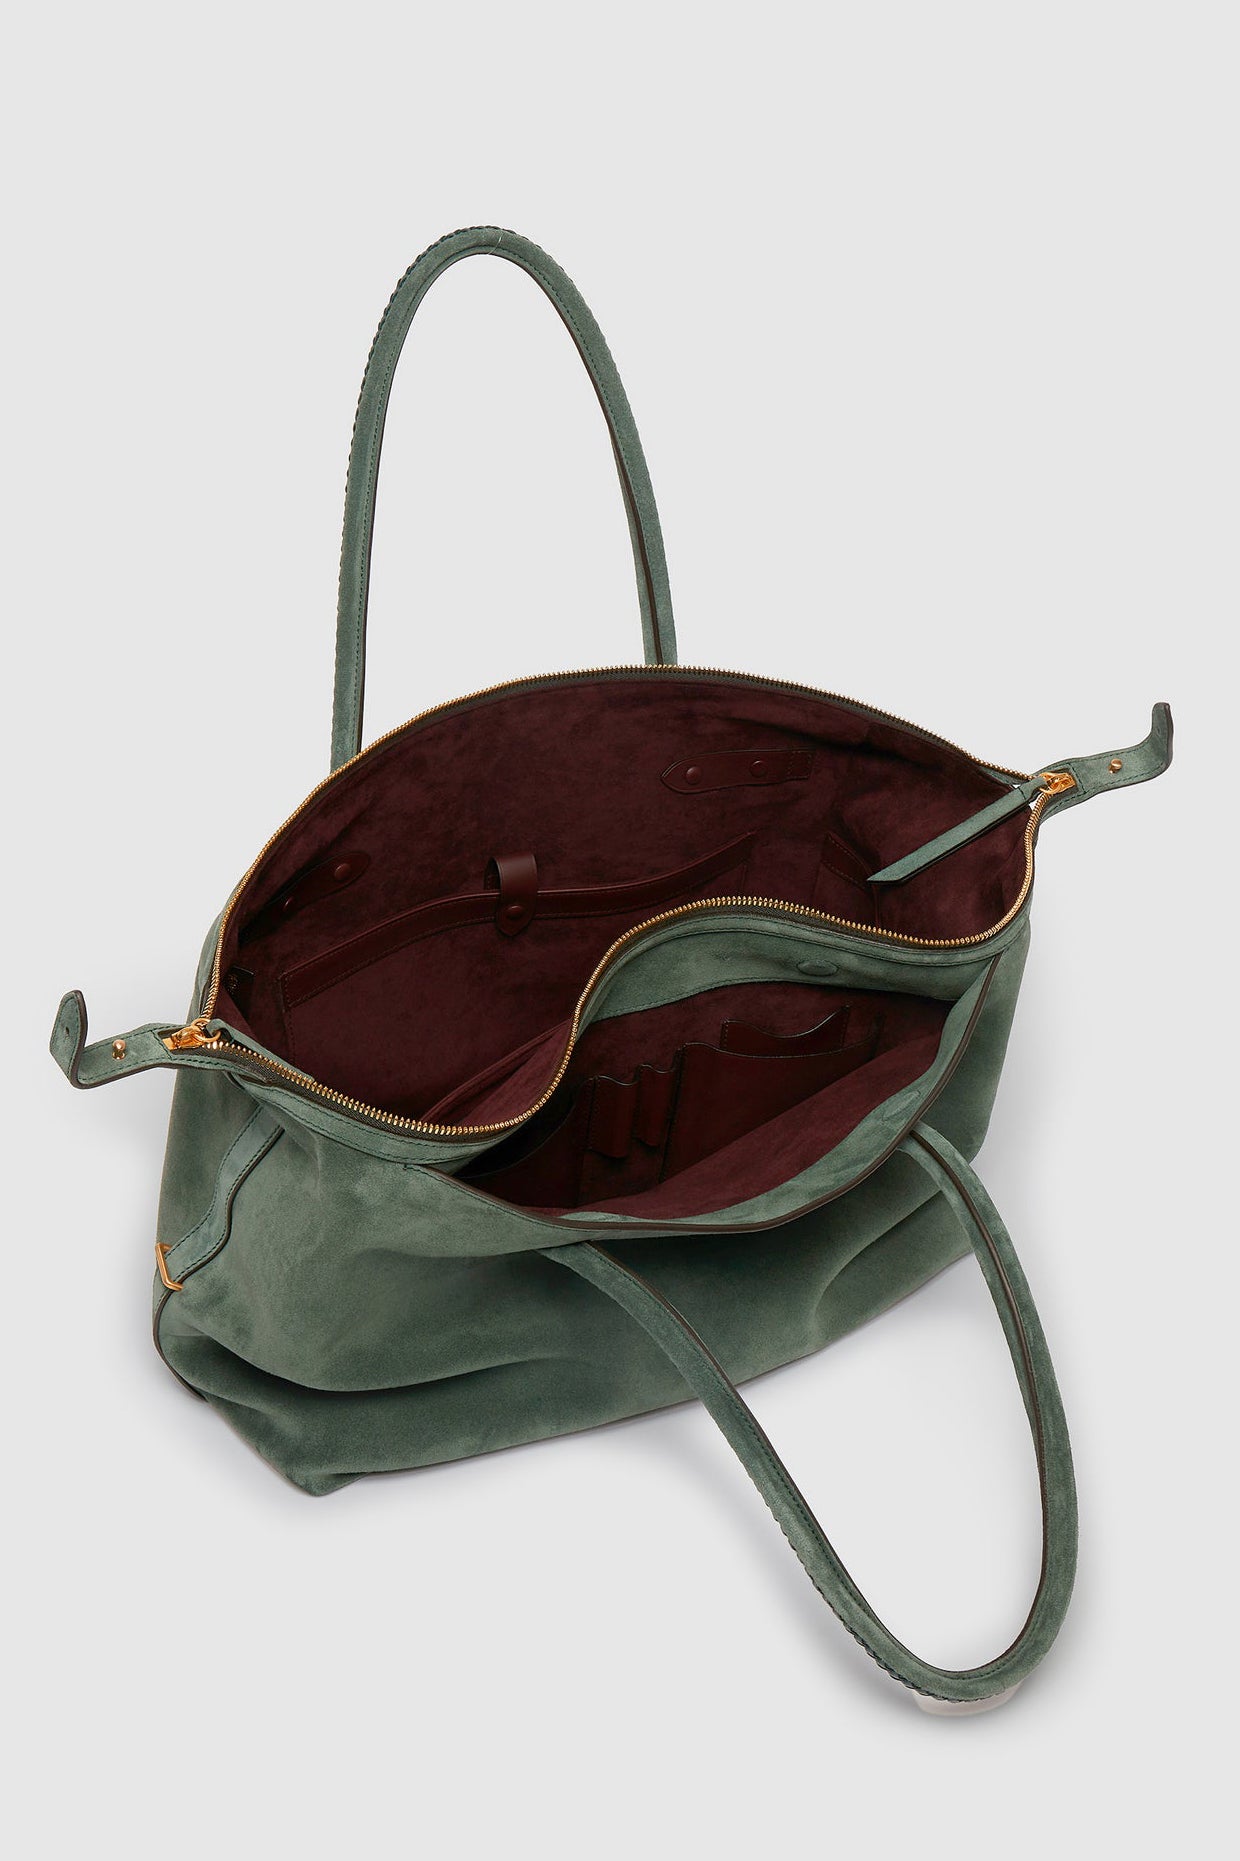 Tasche Perriand All Day in Suede EmeraldMétier - Anita Hass